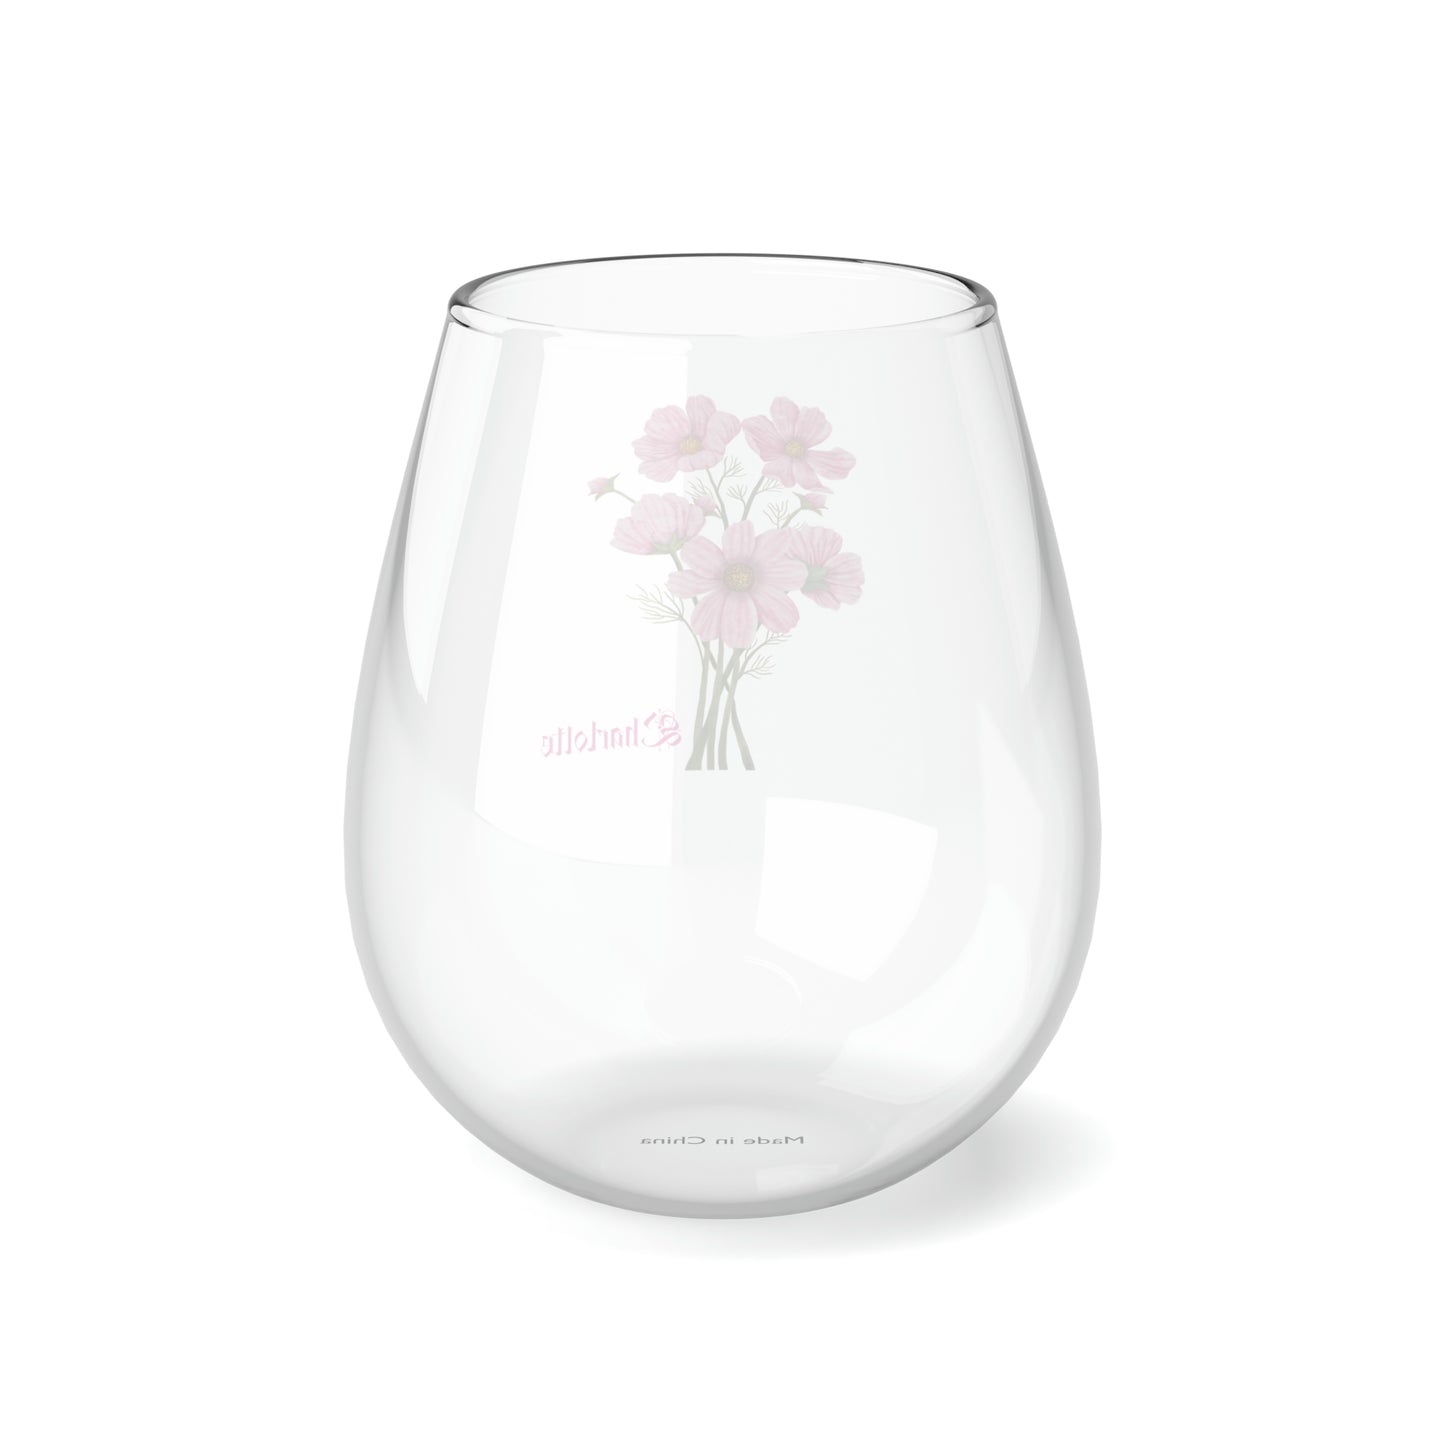 October PERSONALIZED Birth Flower Wine Glass, Birth Flower Gifts, Birth Flower wine glass, Birth Flower Gifts for Women, Gift for coworker, sister gift, birthday gift, Valentine gift, Stemless Wine Glass, 11.75oz